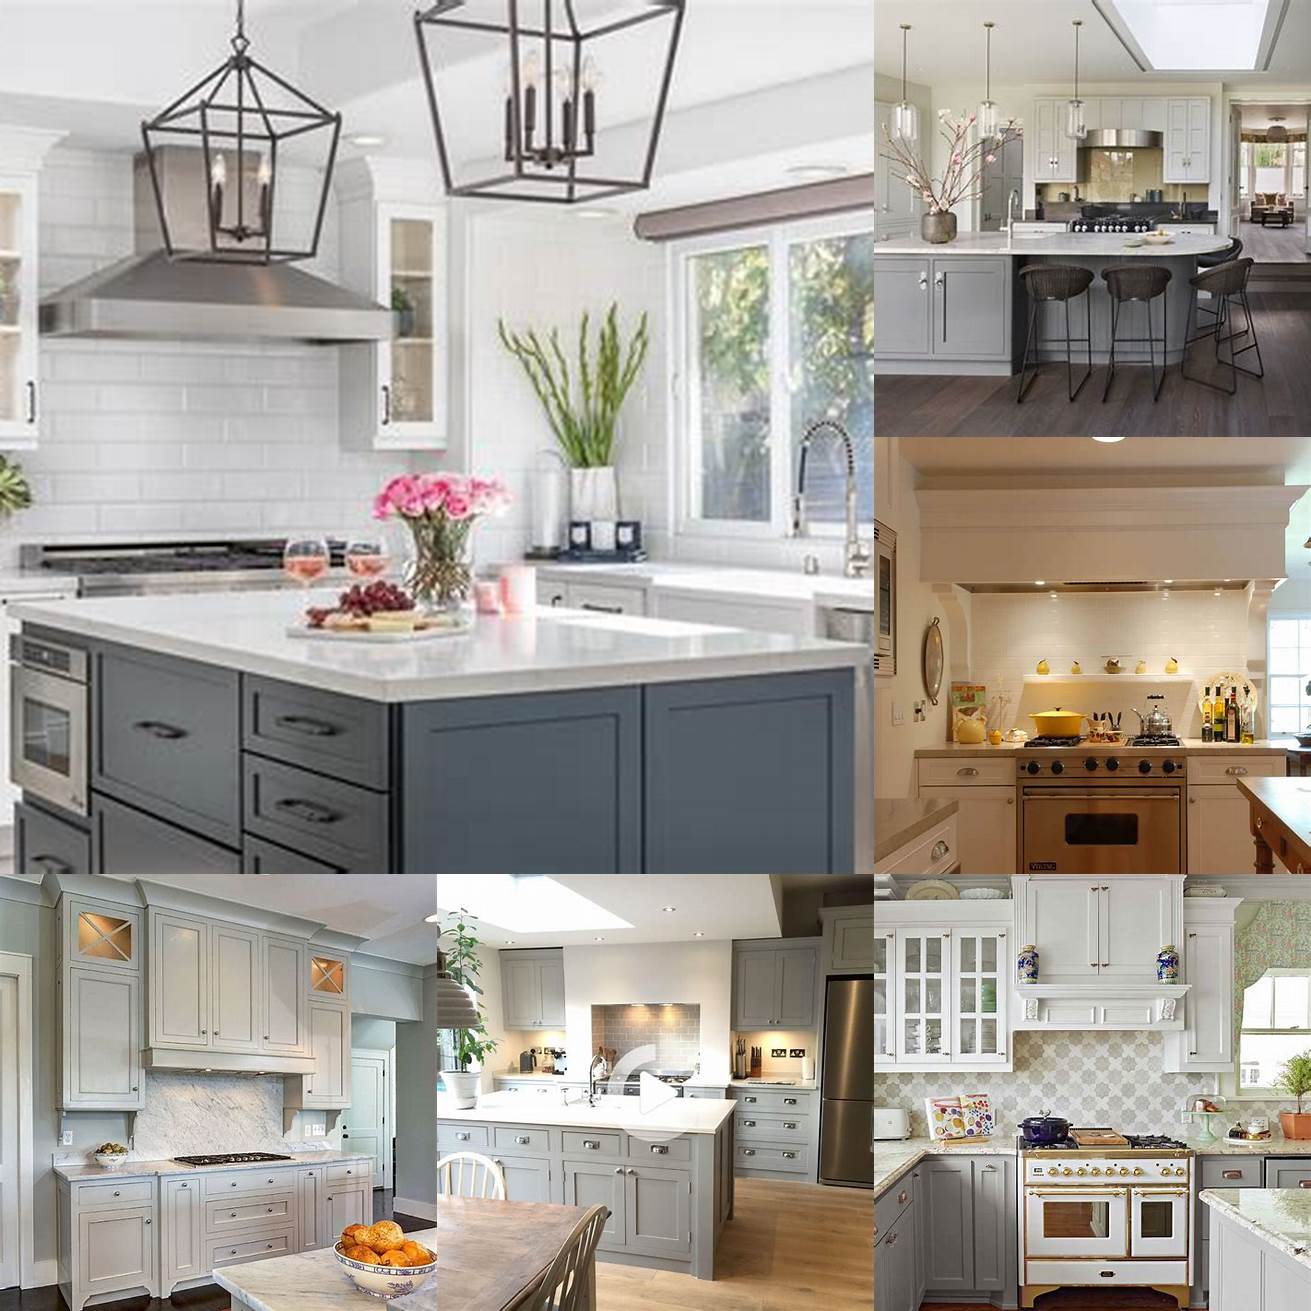 White and gray a classic and timeless combination that works well in any kitchen